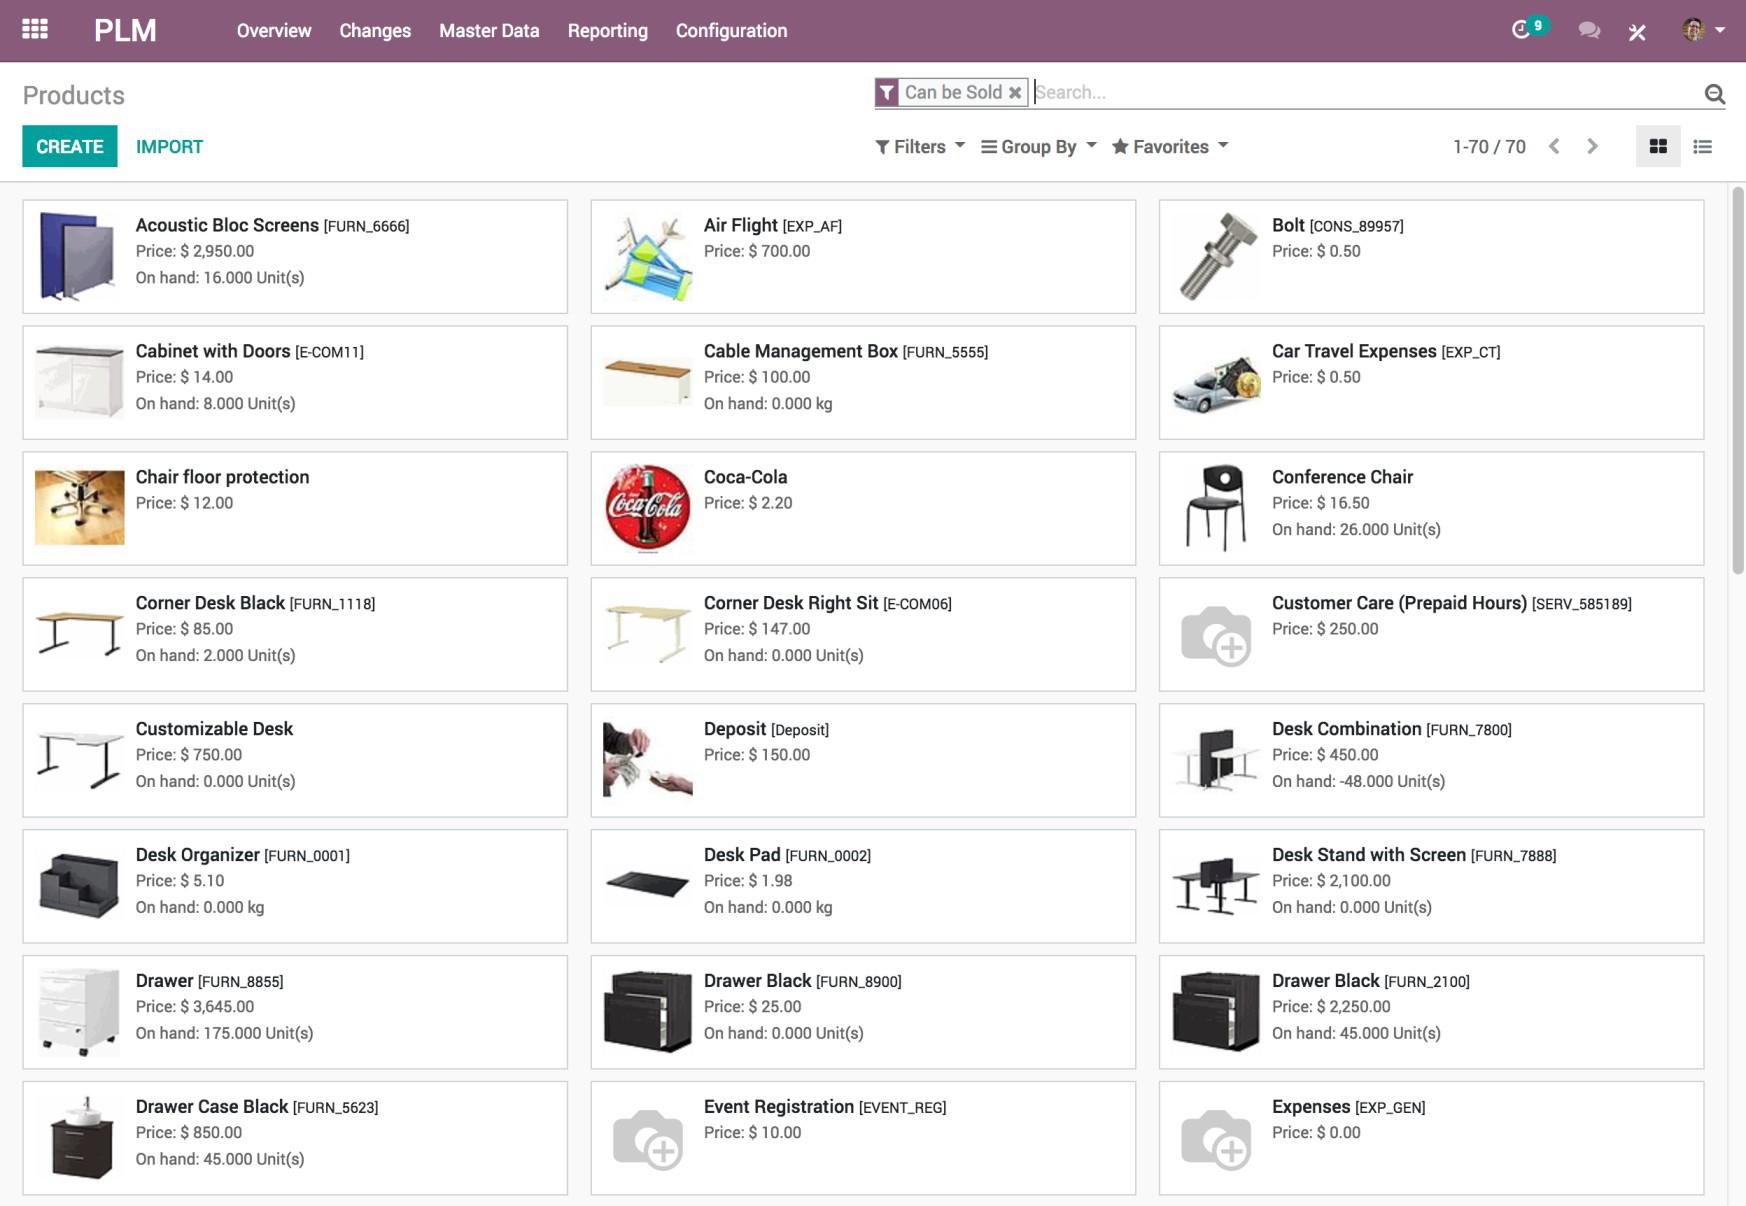 Odoo Manufacturing - Odoo PLM - Products